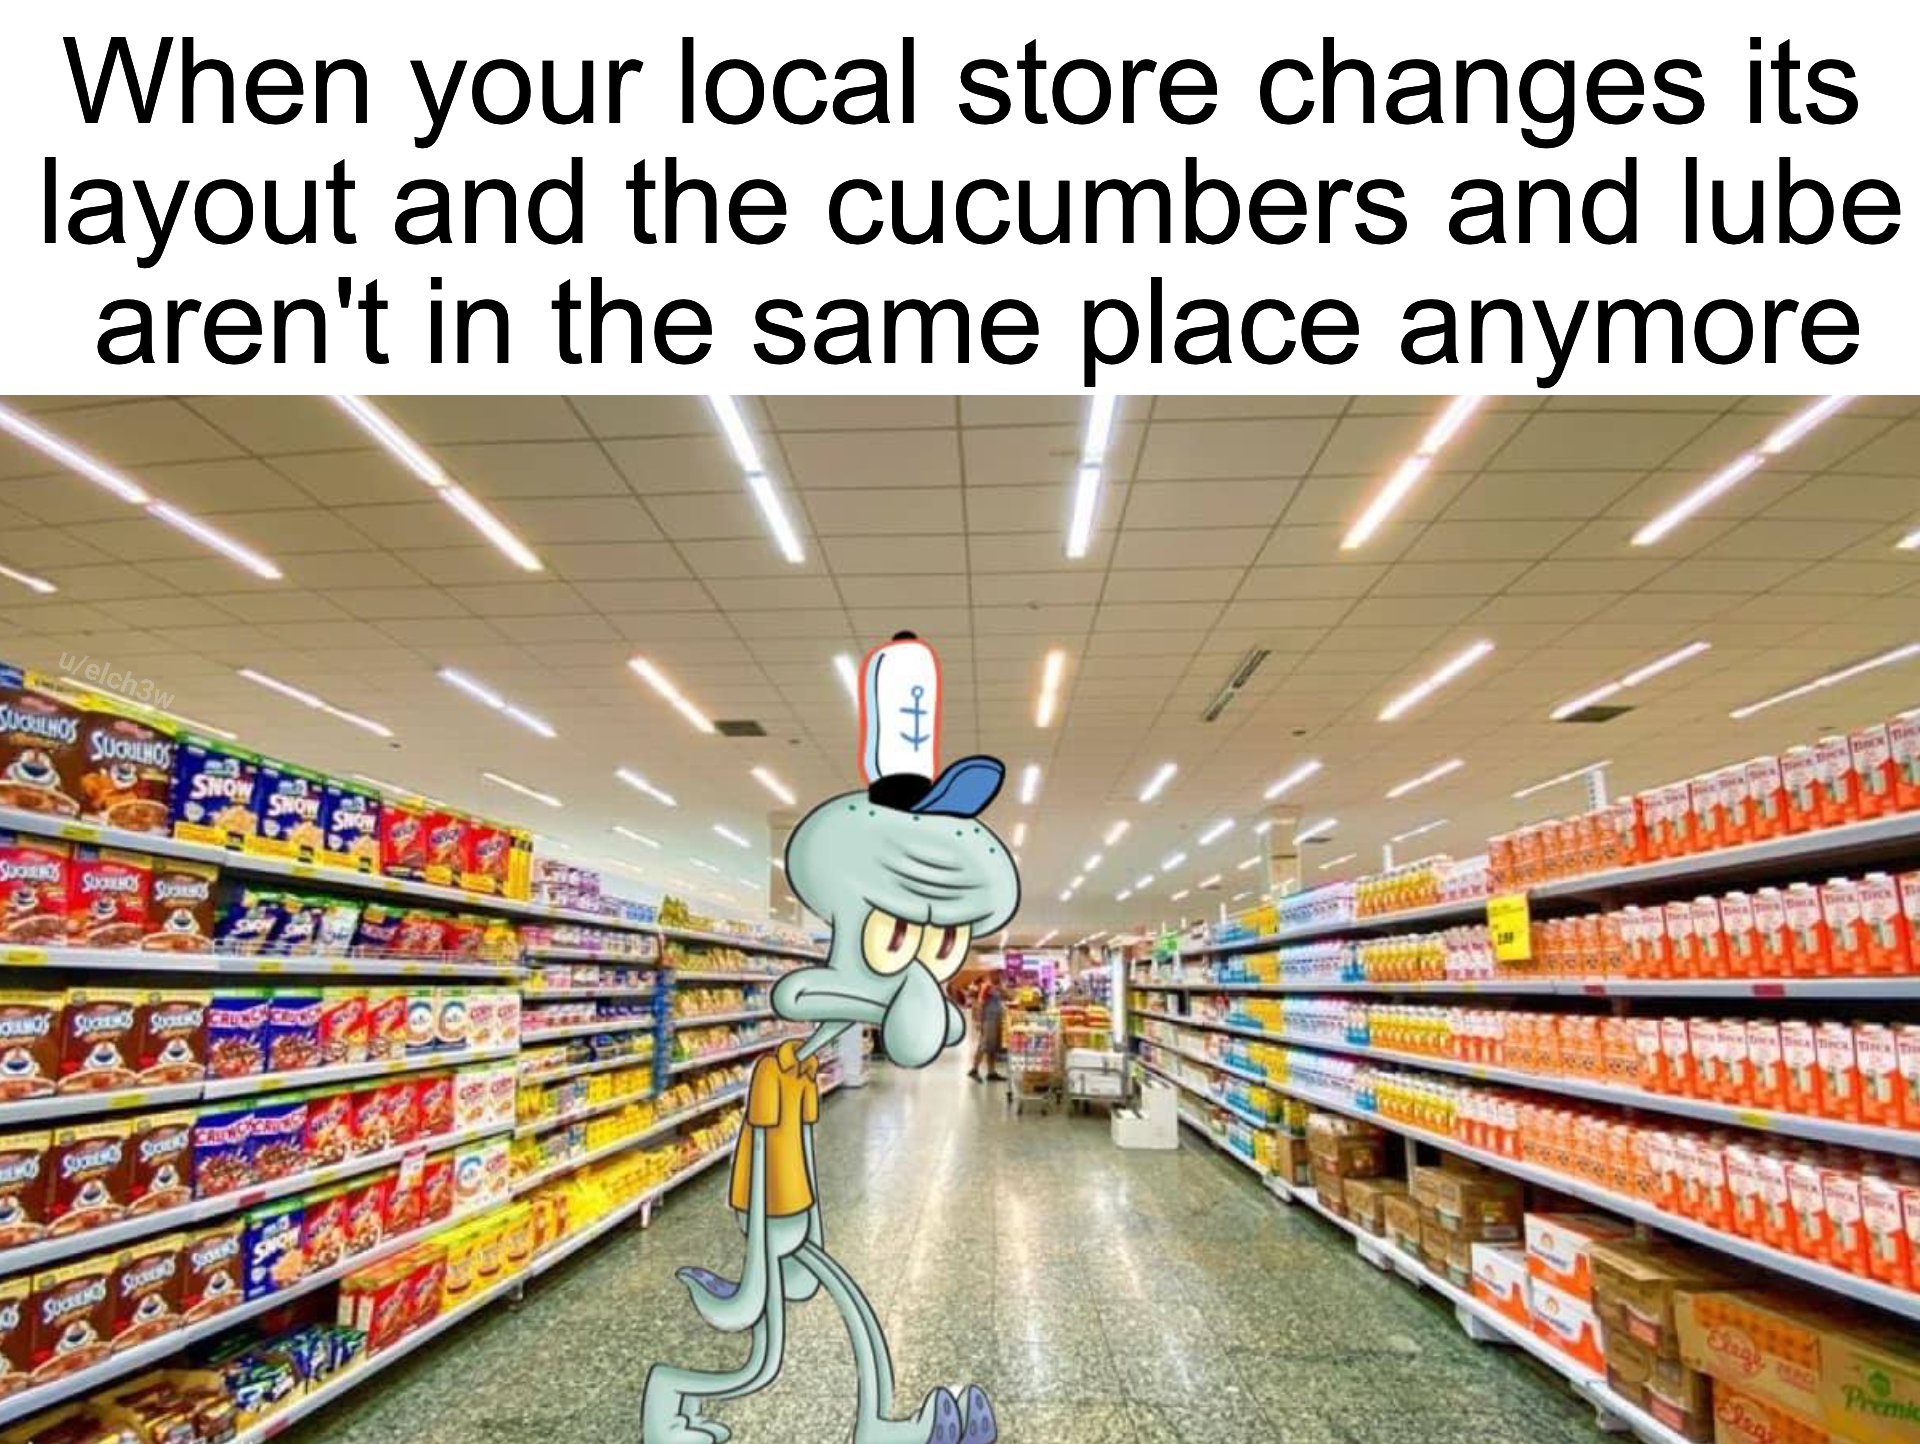 dank memes and pics - supermarket - When your local store changes its layout and the cucumbers and lube aren't in the same place anymore Sos Cons Sprky Samas S ott Renco Jan